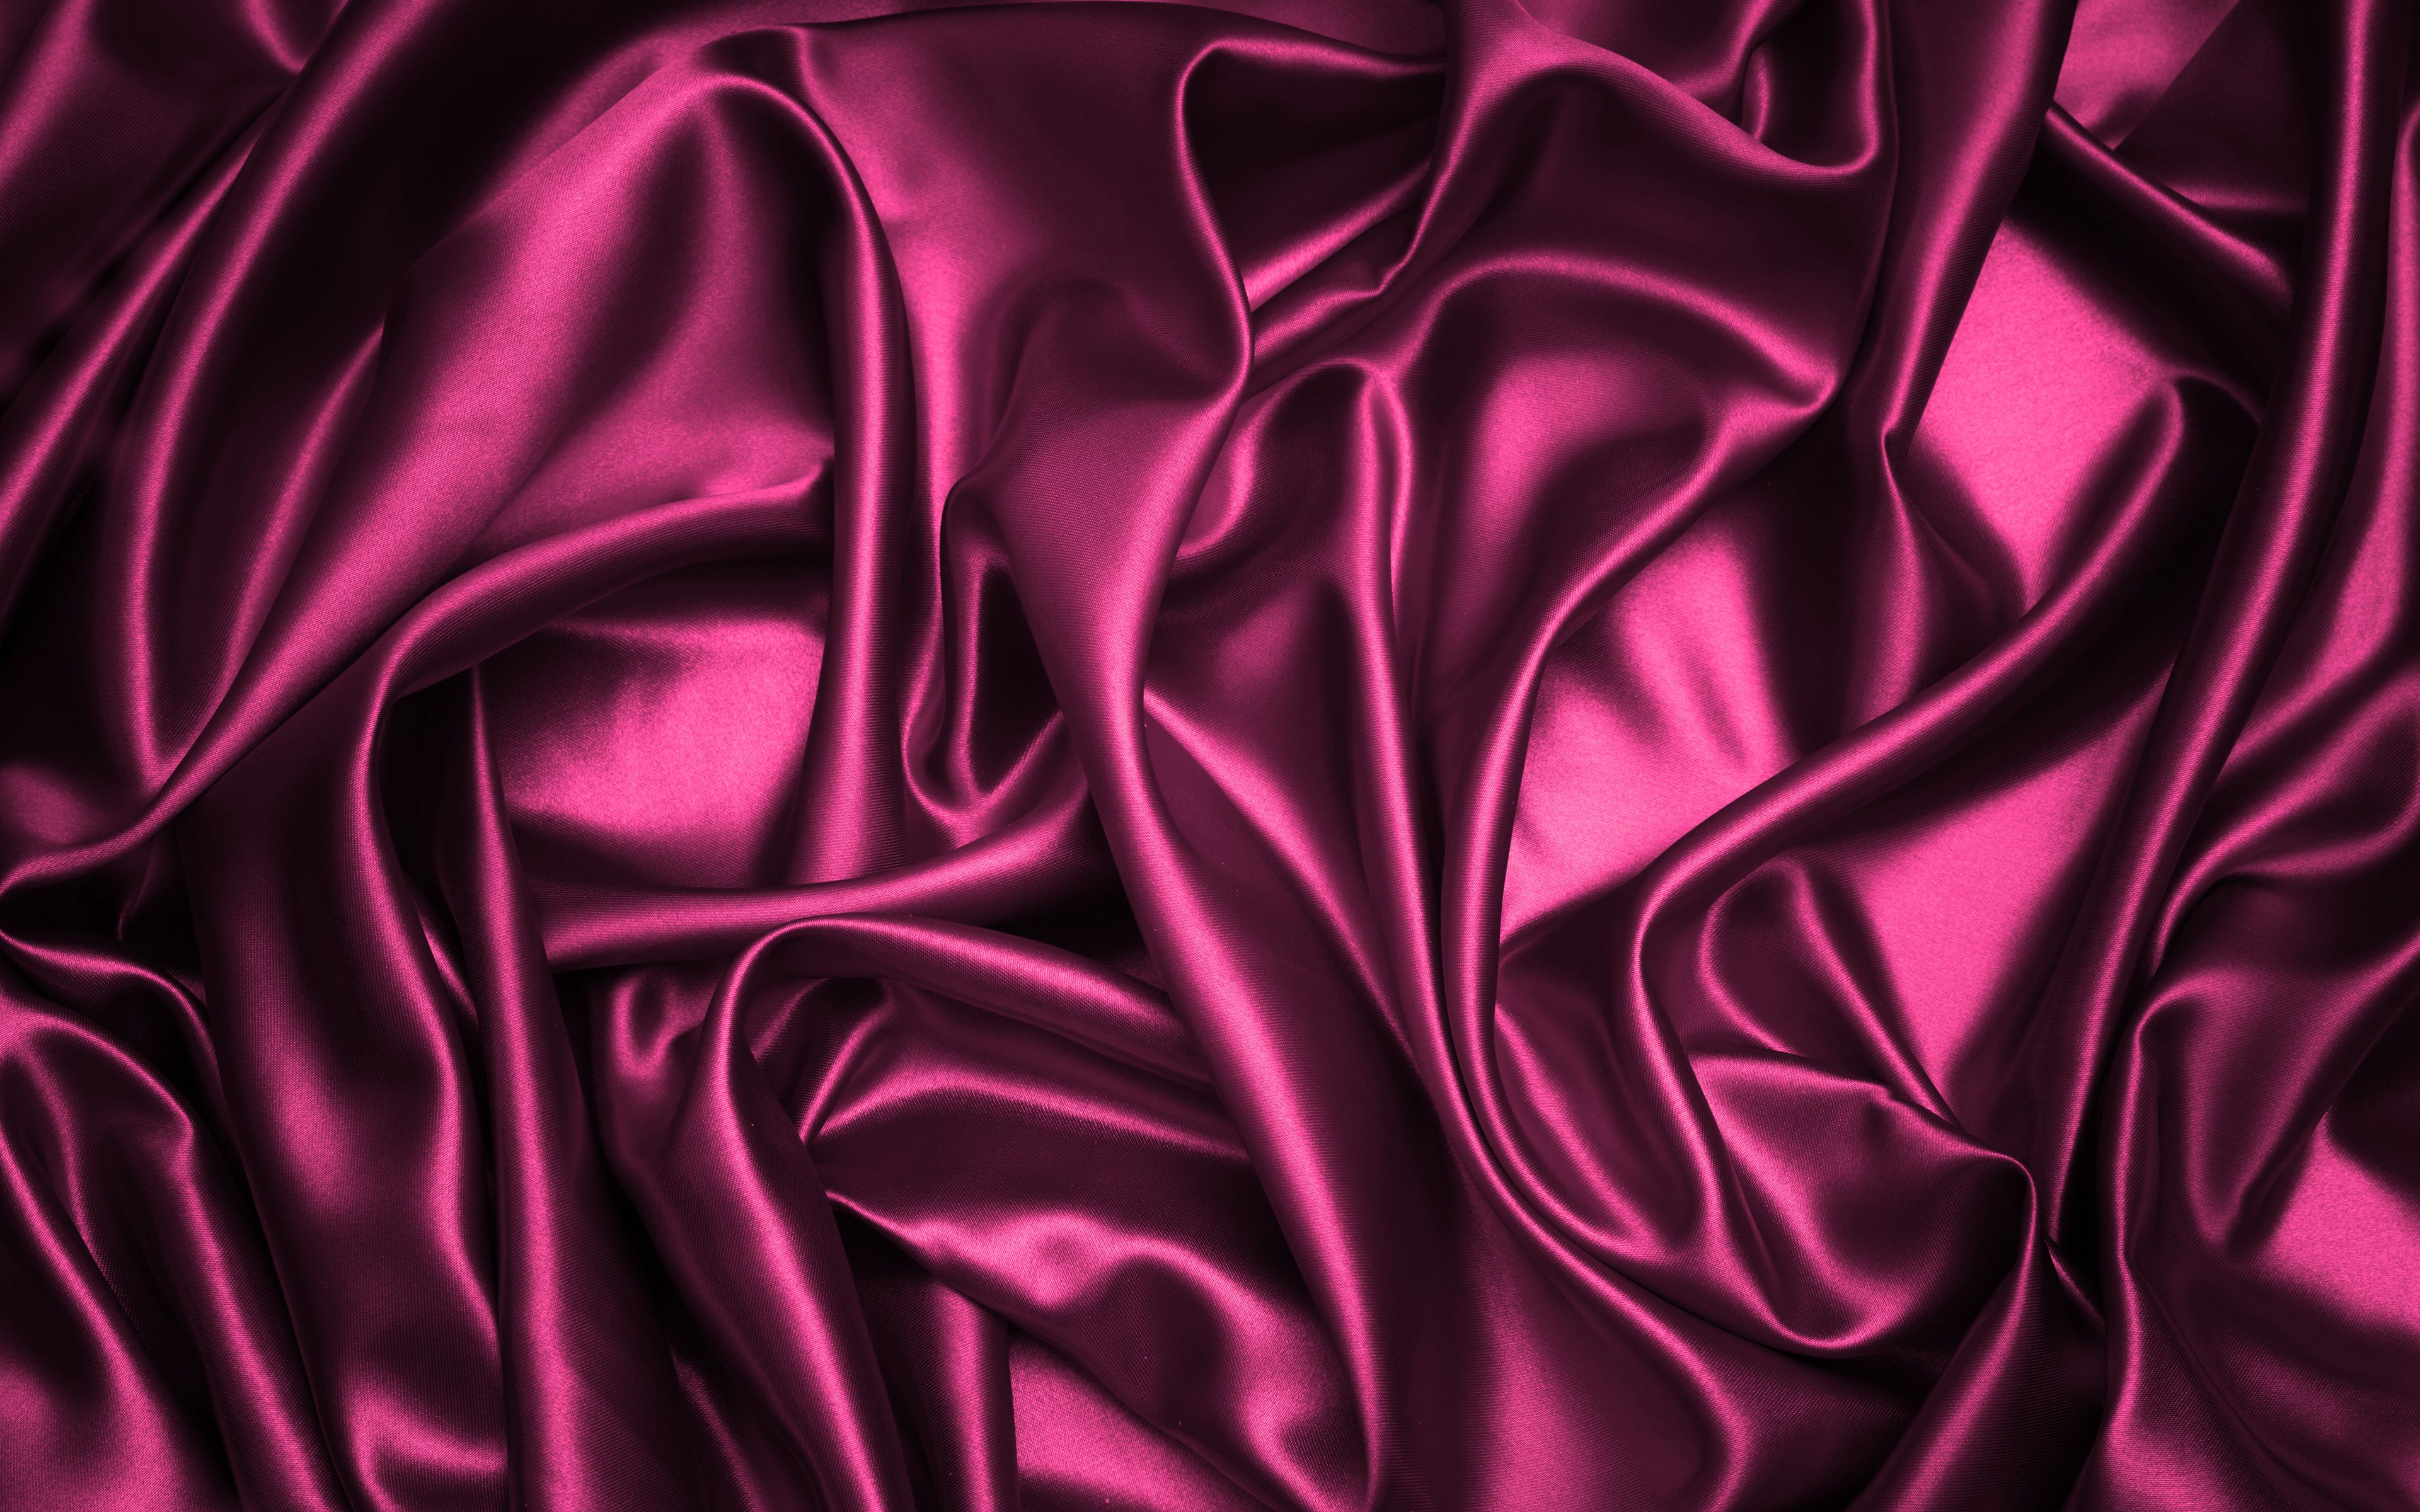 Download wallpaper pink silk, 4k, pink fabric texture, silk, pink background, pink satin, fabric textures, satin, silk textures for desktop with resolution 3840x2400. High Quality HD picture wallpaper